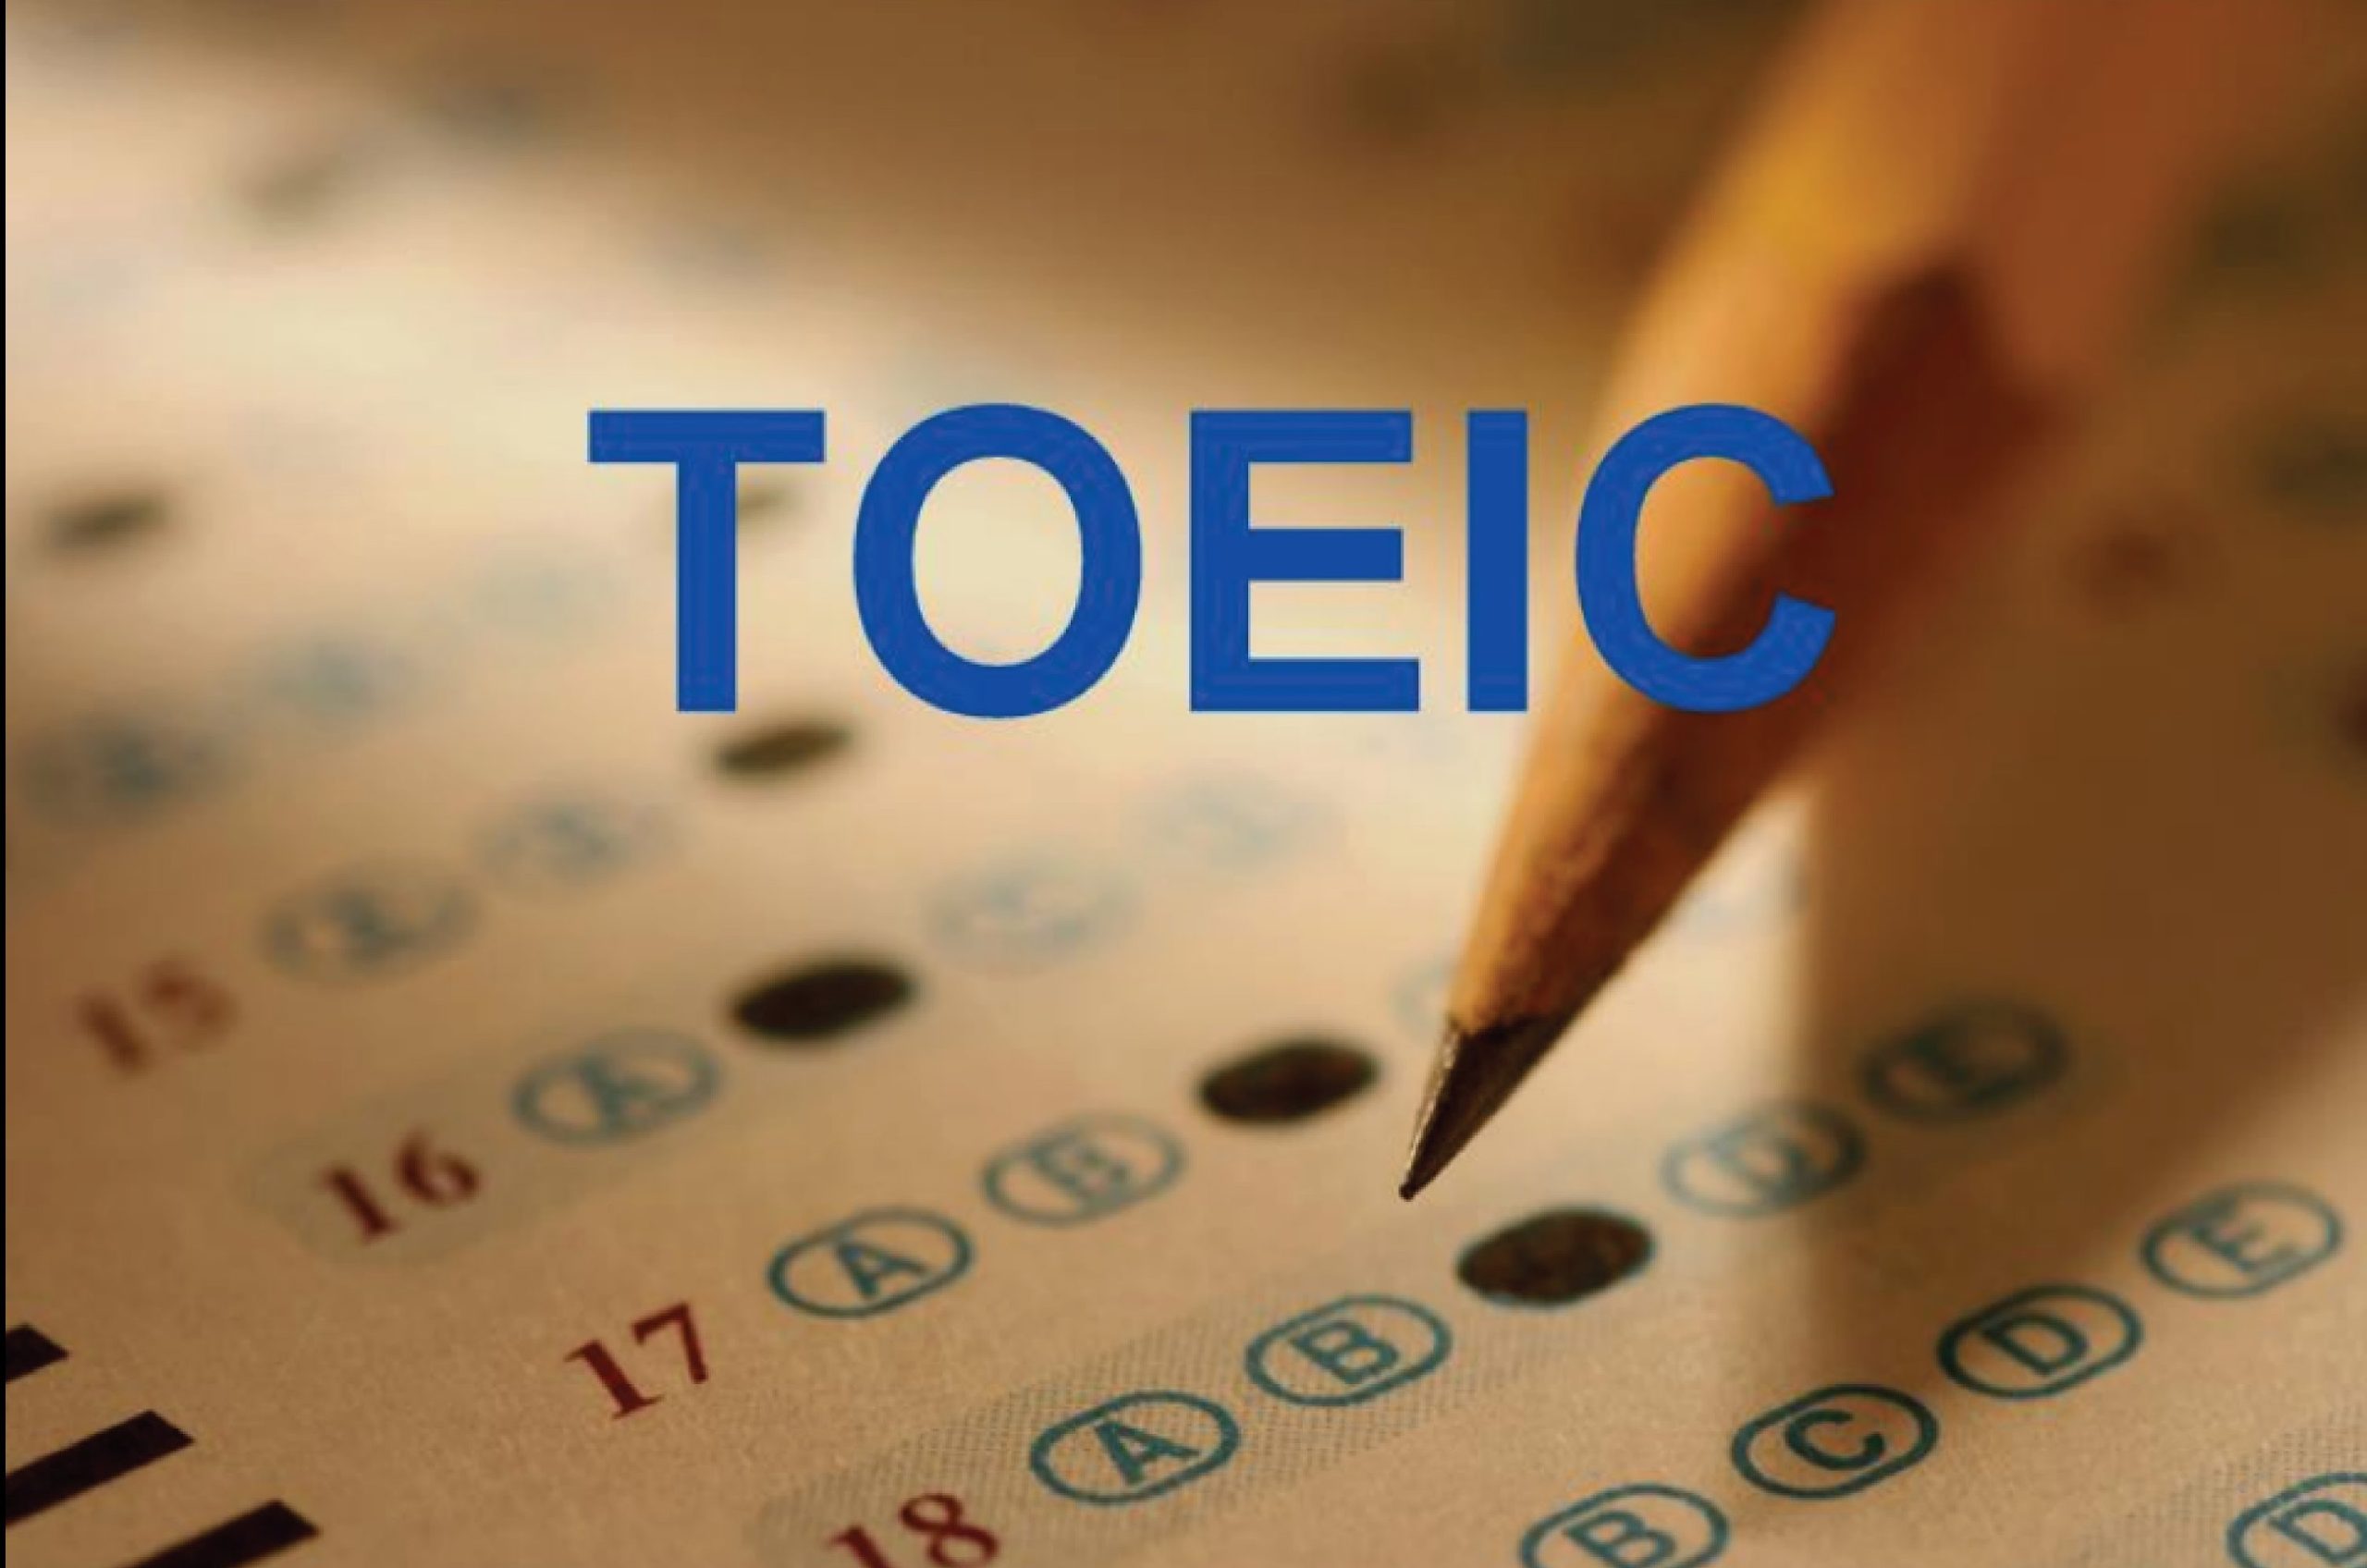 trung tam hoc toeic binh duong 1 scaled